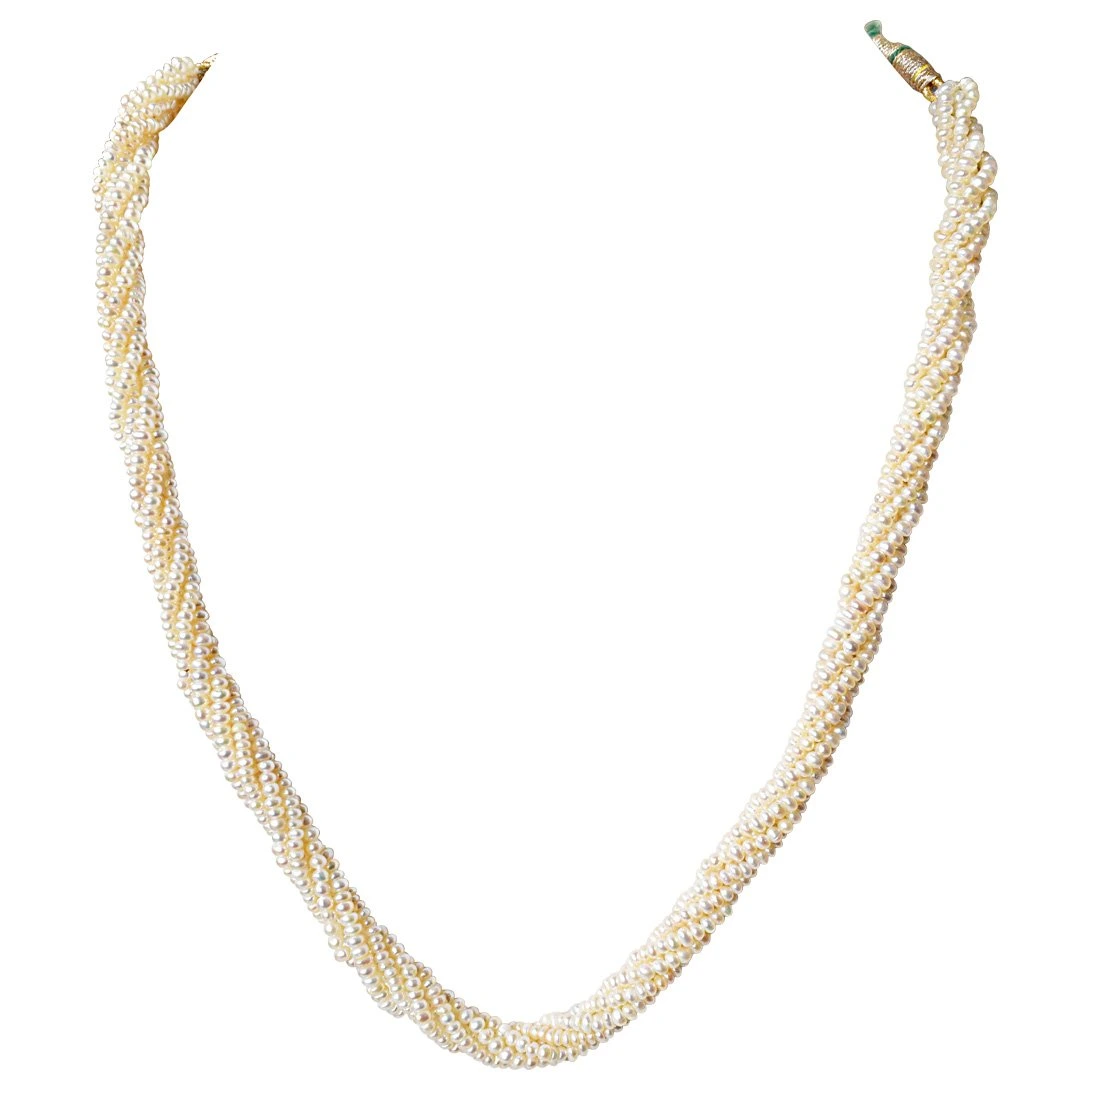 6 Line Twisted Real Natural Freshwater Pearl Necklace for Women (SN930)